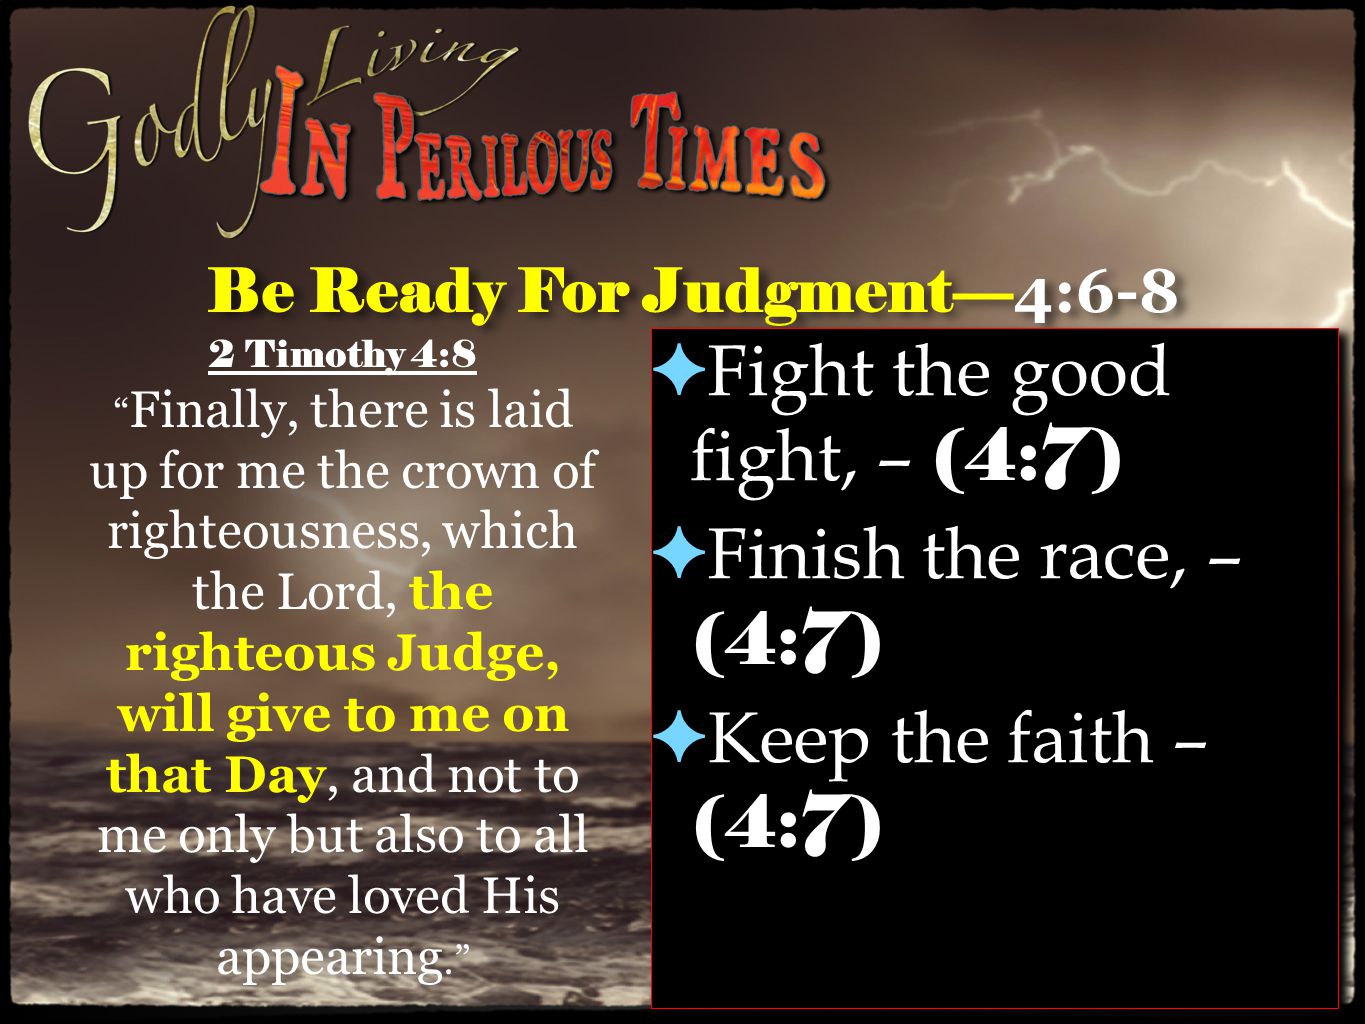 Be Ready For Judgment— 4:6-8 ✦ Fight the good fight, – (4:7) ✦ Finish the race, – (4:7) ✦ Keep the faith – (4:7) ✦ Fight the good fight, – (4:7) ✦ Finish the race, – (4:7) ✦ Keep the faith – (4:7) 2 Timothy 4:8 Finally, there is laid up for me the crown of righteousness, which the Lord, the righteous Judge, will give to me on that Day, and not to me only but also to all who have loved His appearing.